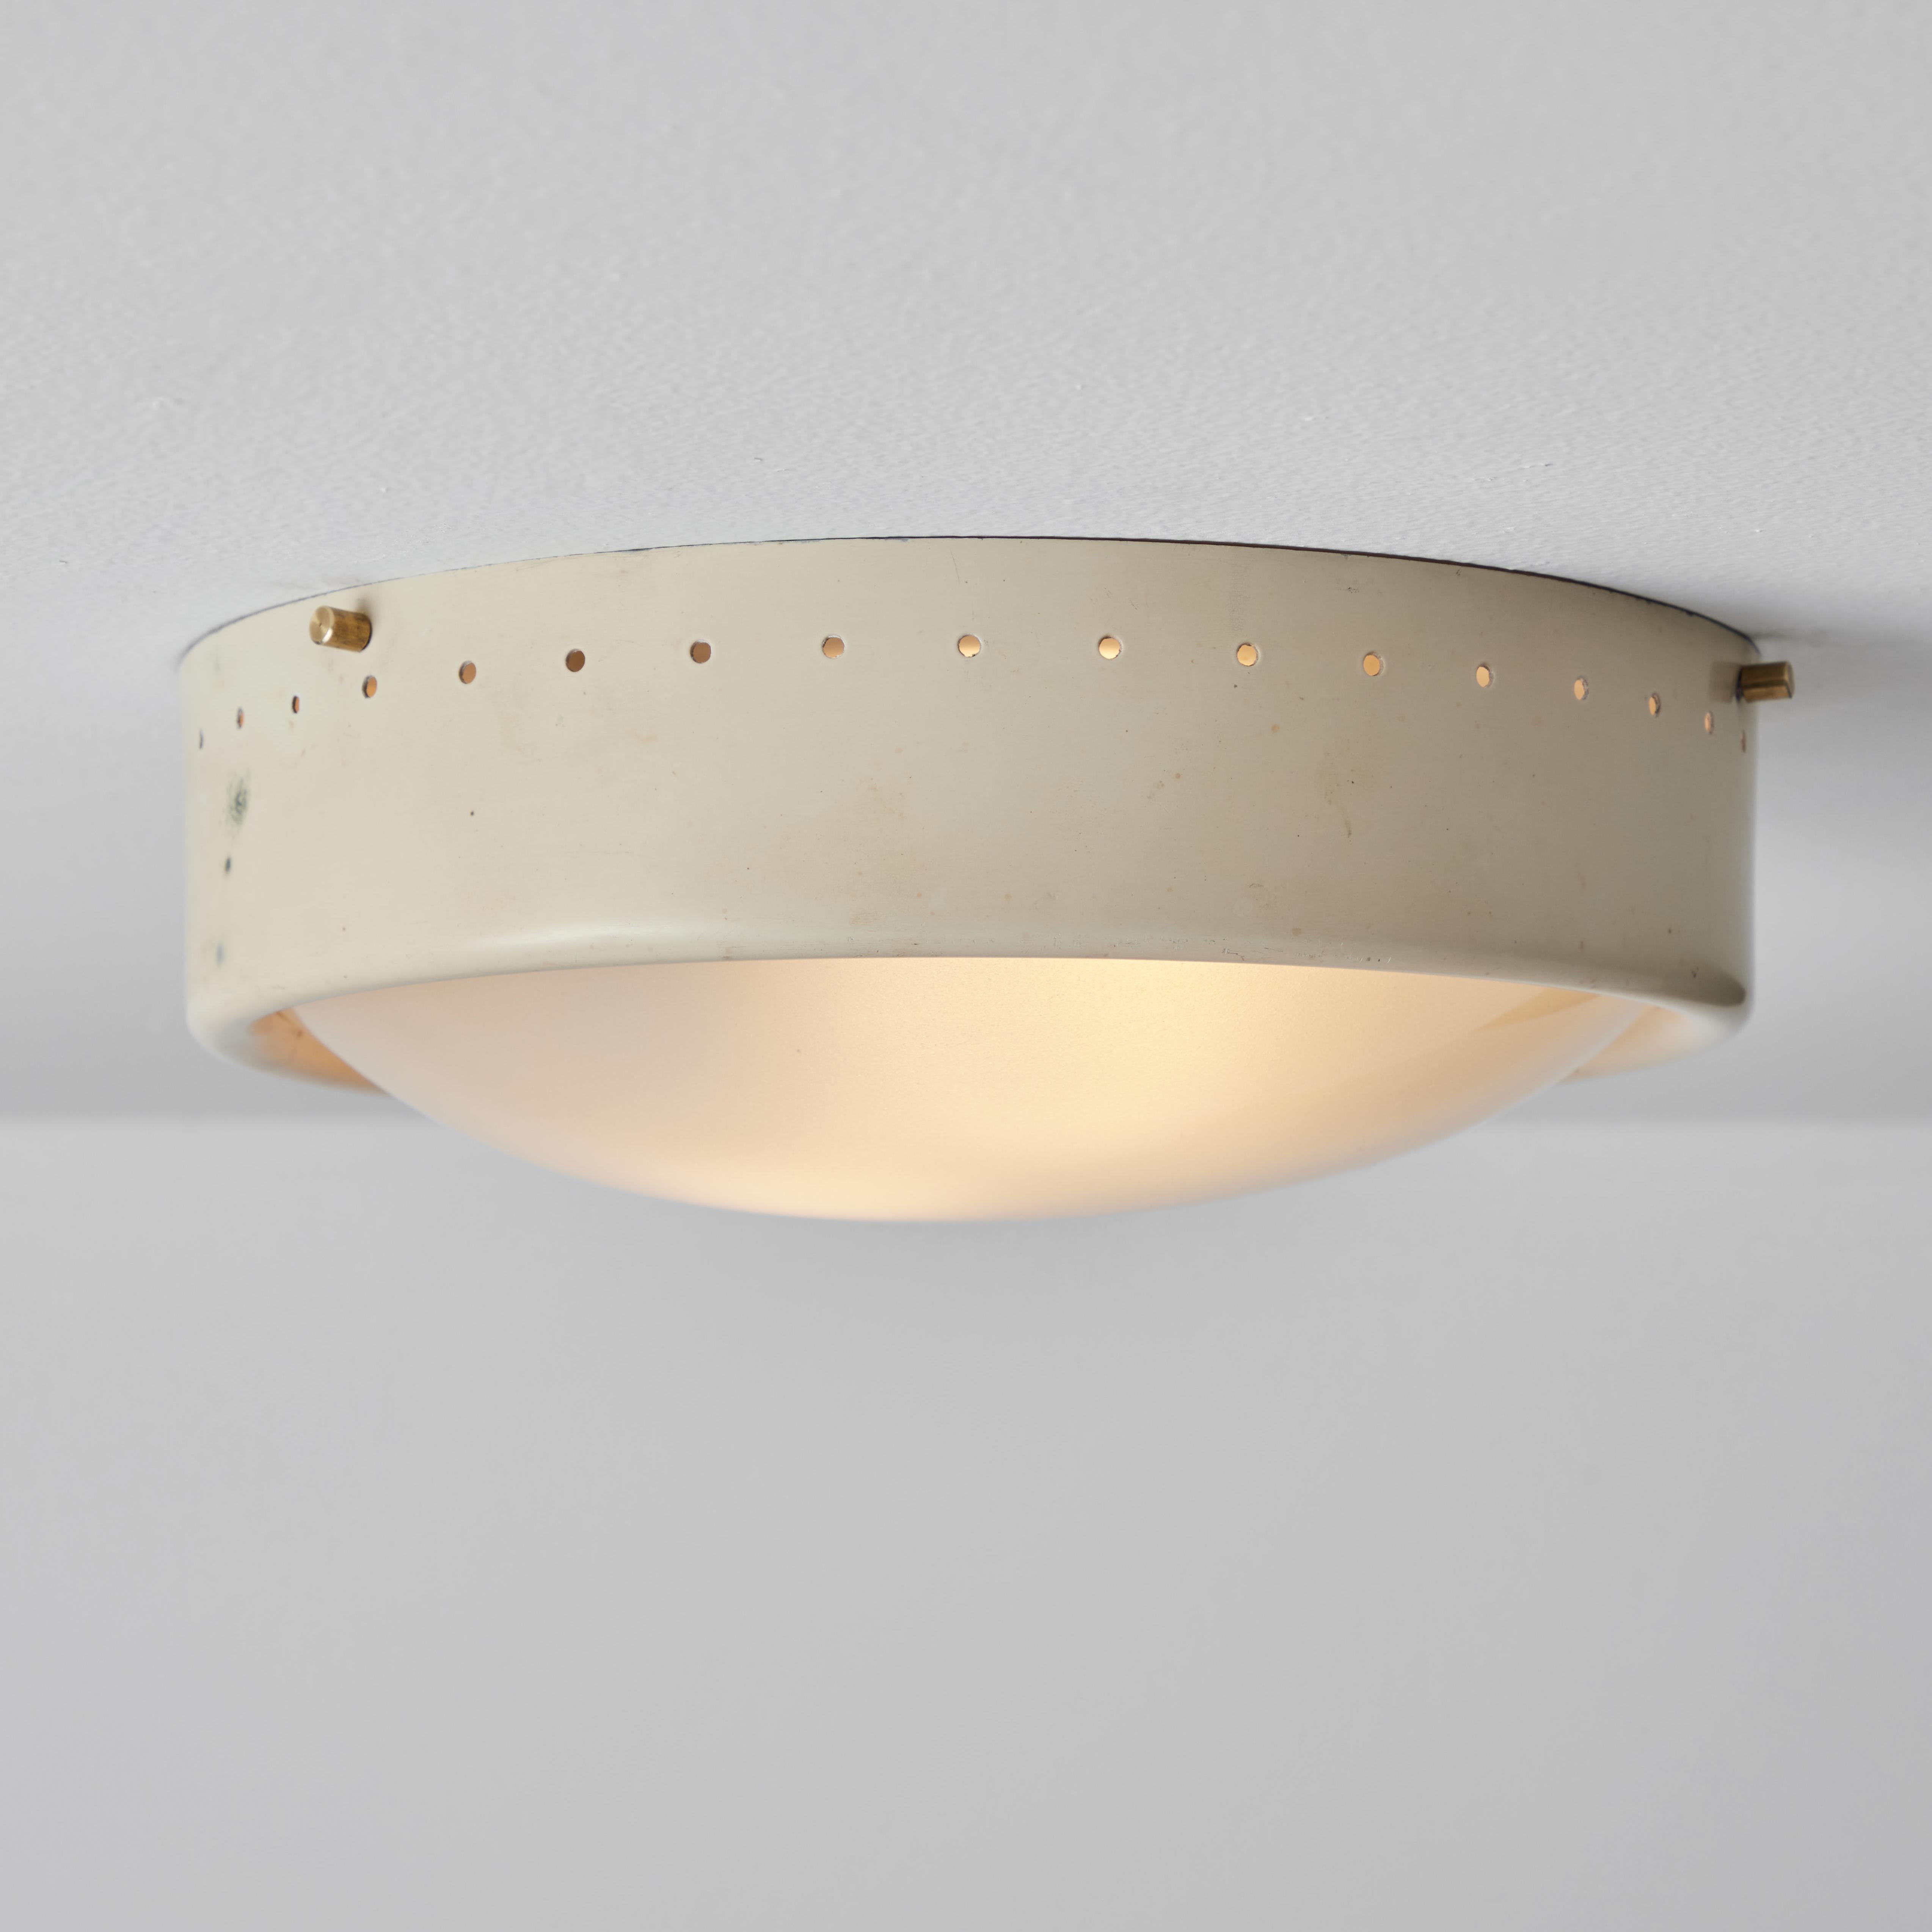 1960s Gino Sarfatti Perforated metal and opaline glass flush mount for Arteluce. Executed in curved opaline glass and painted perforated metal. The simplicity of Sarfatti's design and the sculptural shaping of the materials make for an incredibly